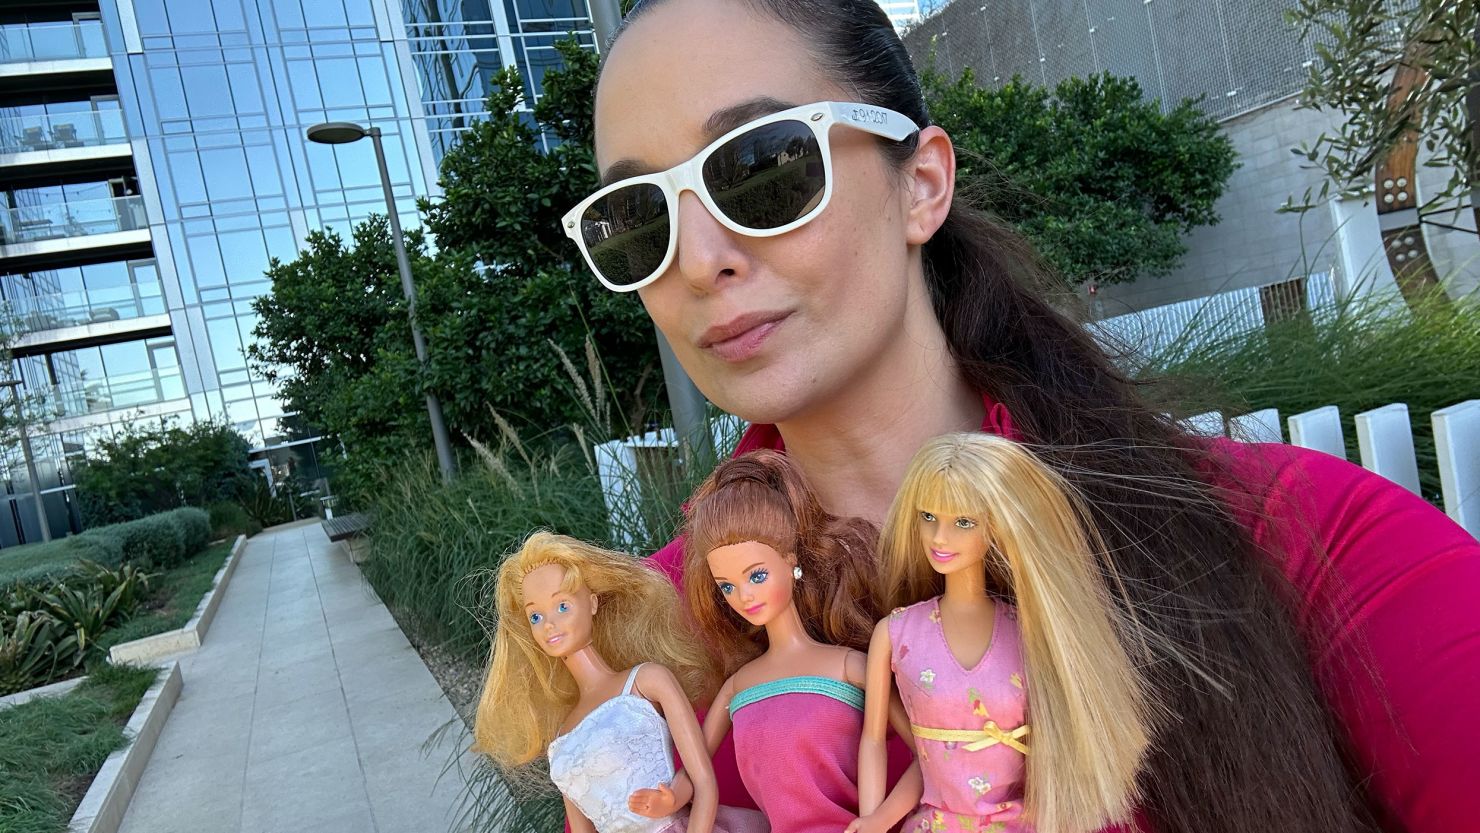 This former 80s model looked just like Barbie. But becoming a mom